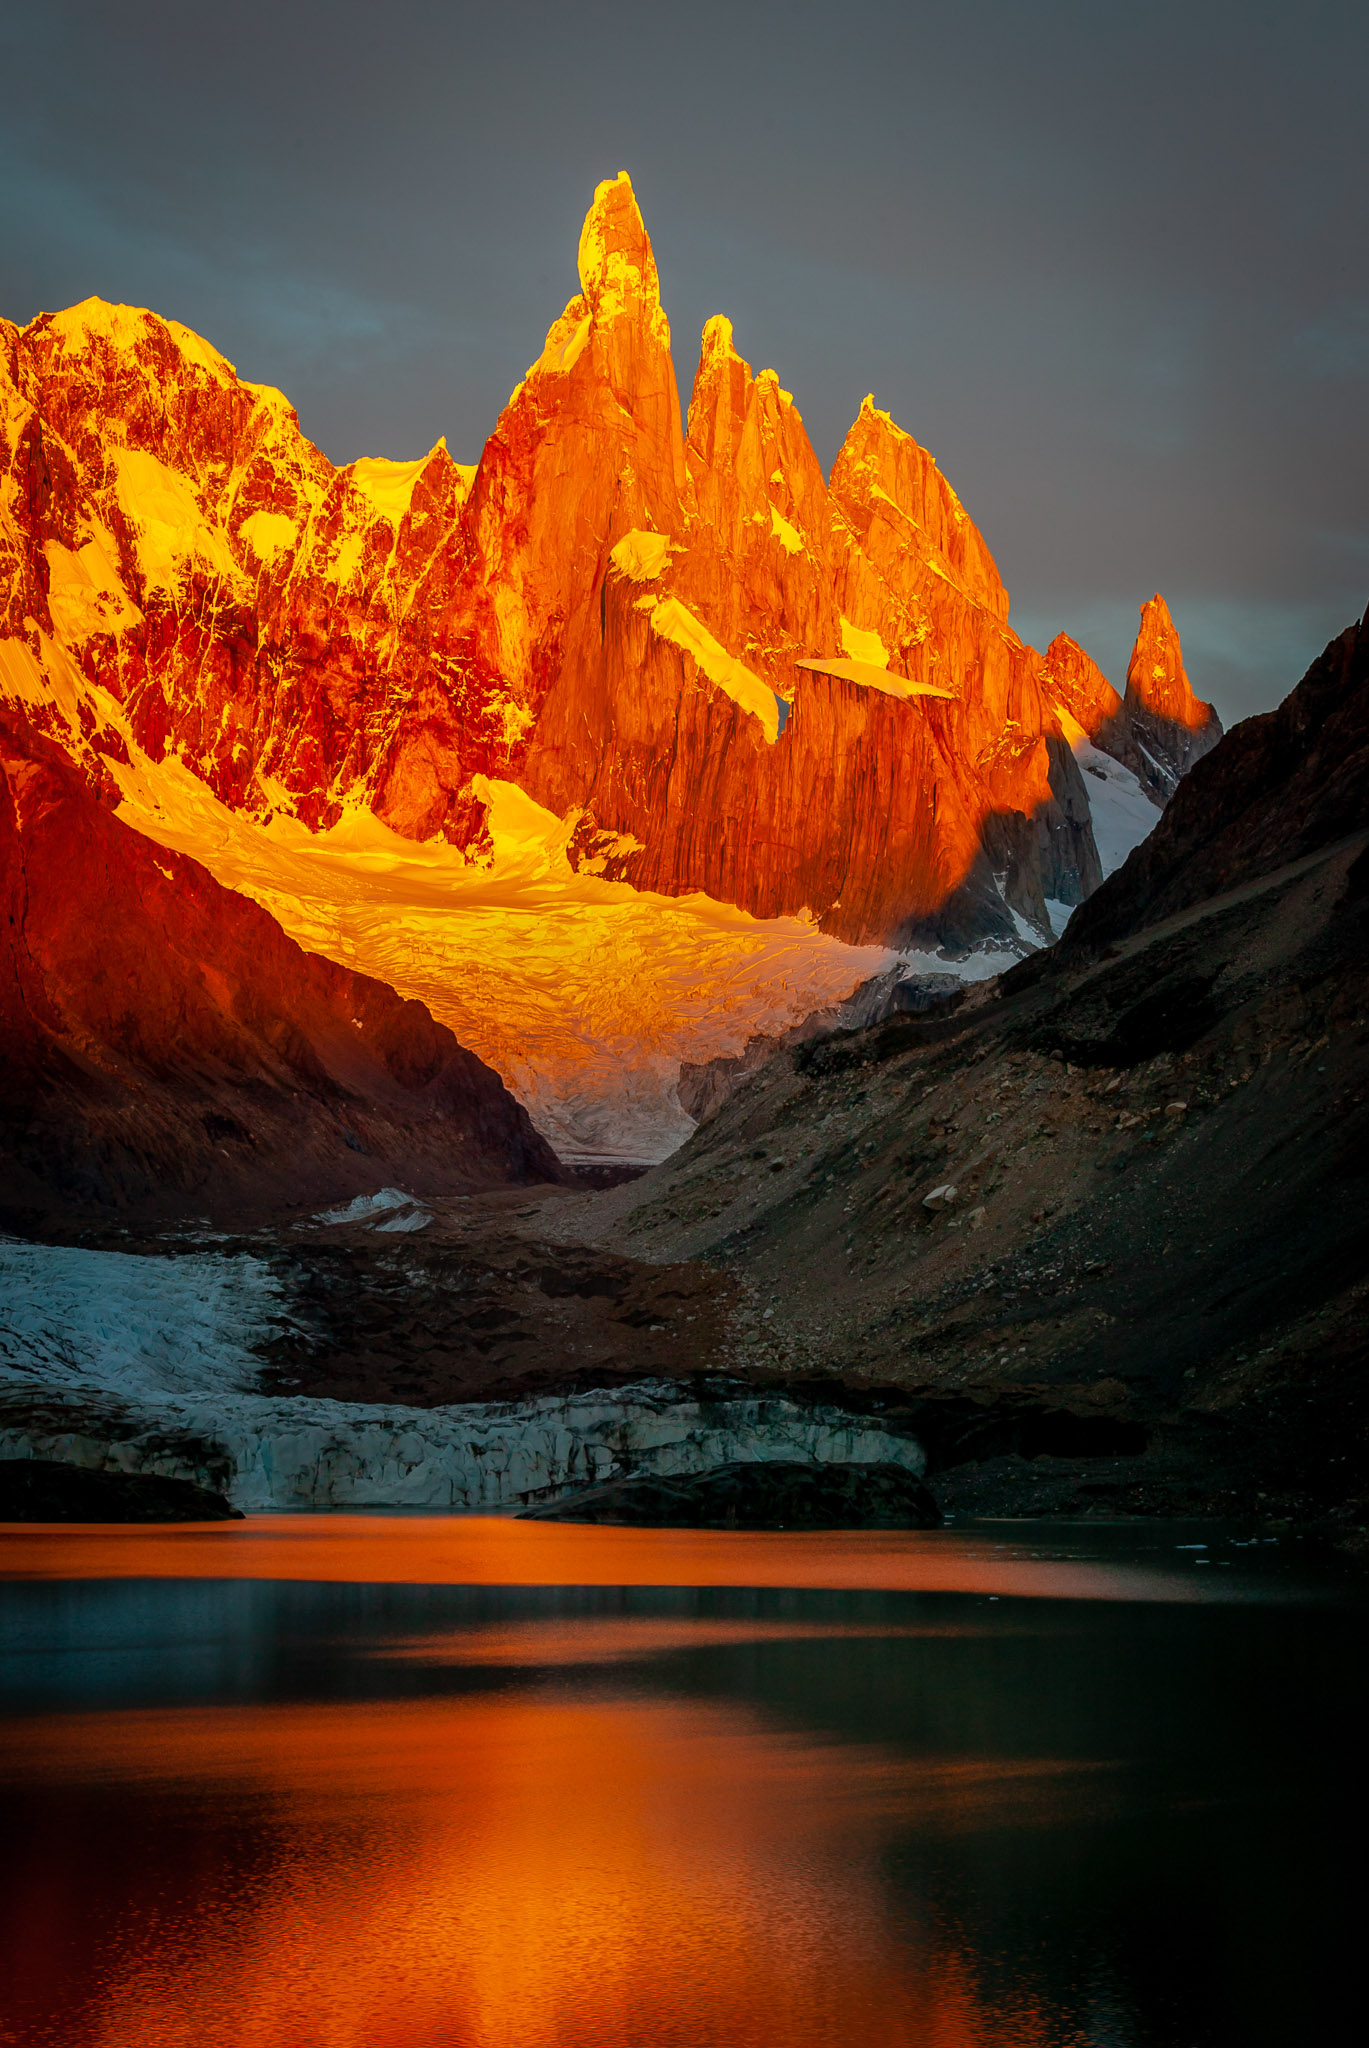 First light on Cerro Torre, Patagonia, Argentina